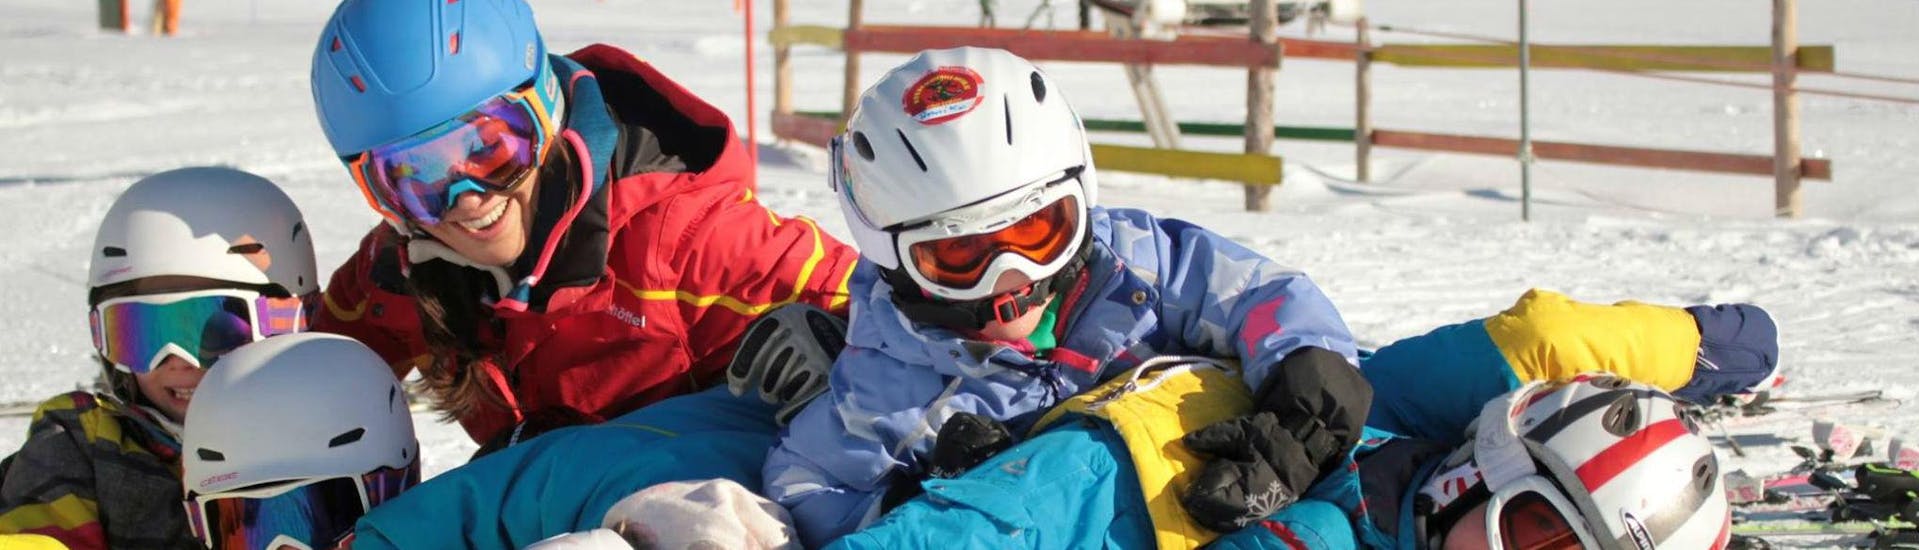 Kids Ski Lessons (3-15 y.) for Advanced Skiers - Full-Day.